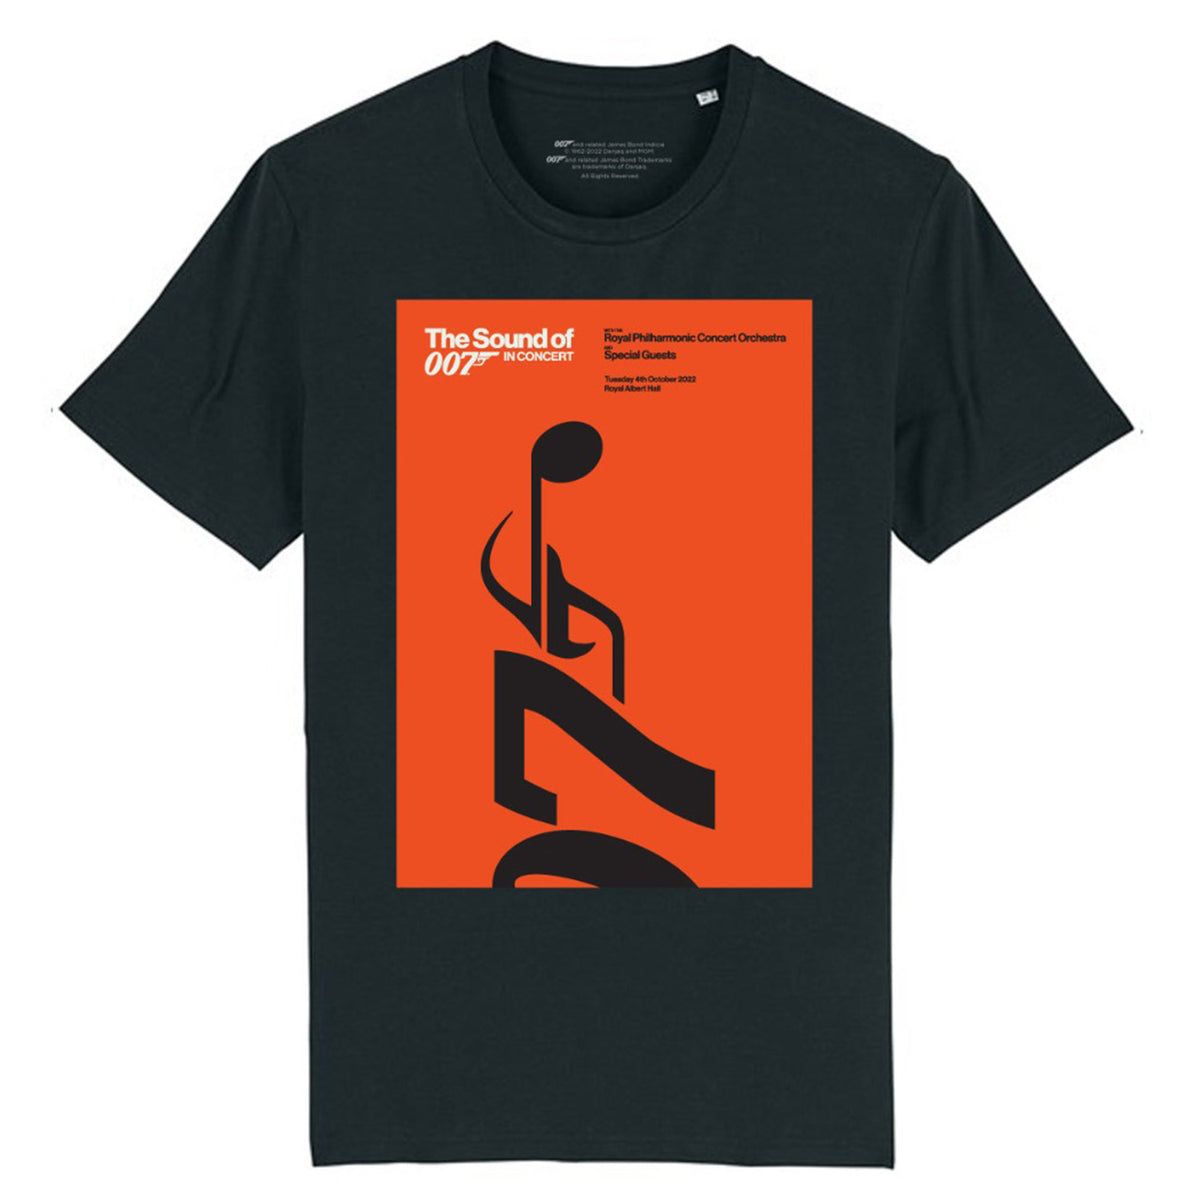 James Bond The Sound of 007 In Concert T-Shirt - Limited Edition